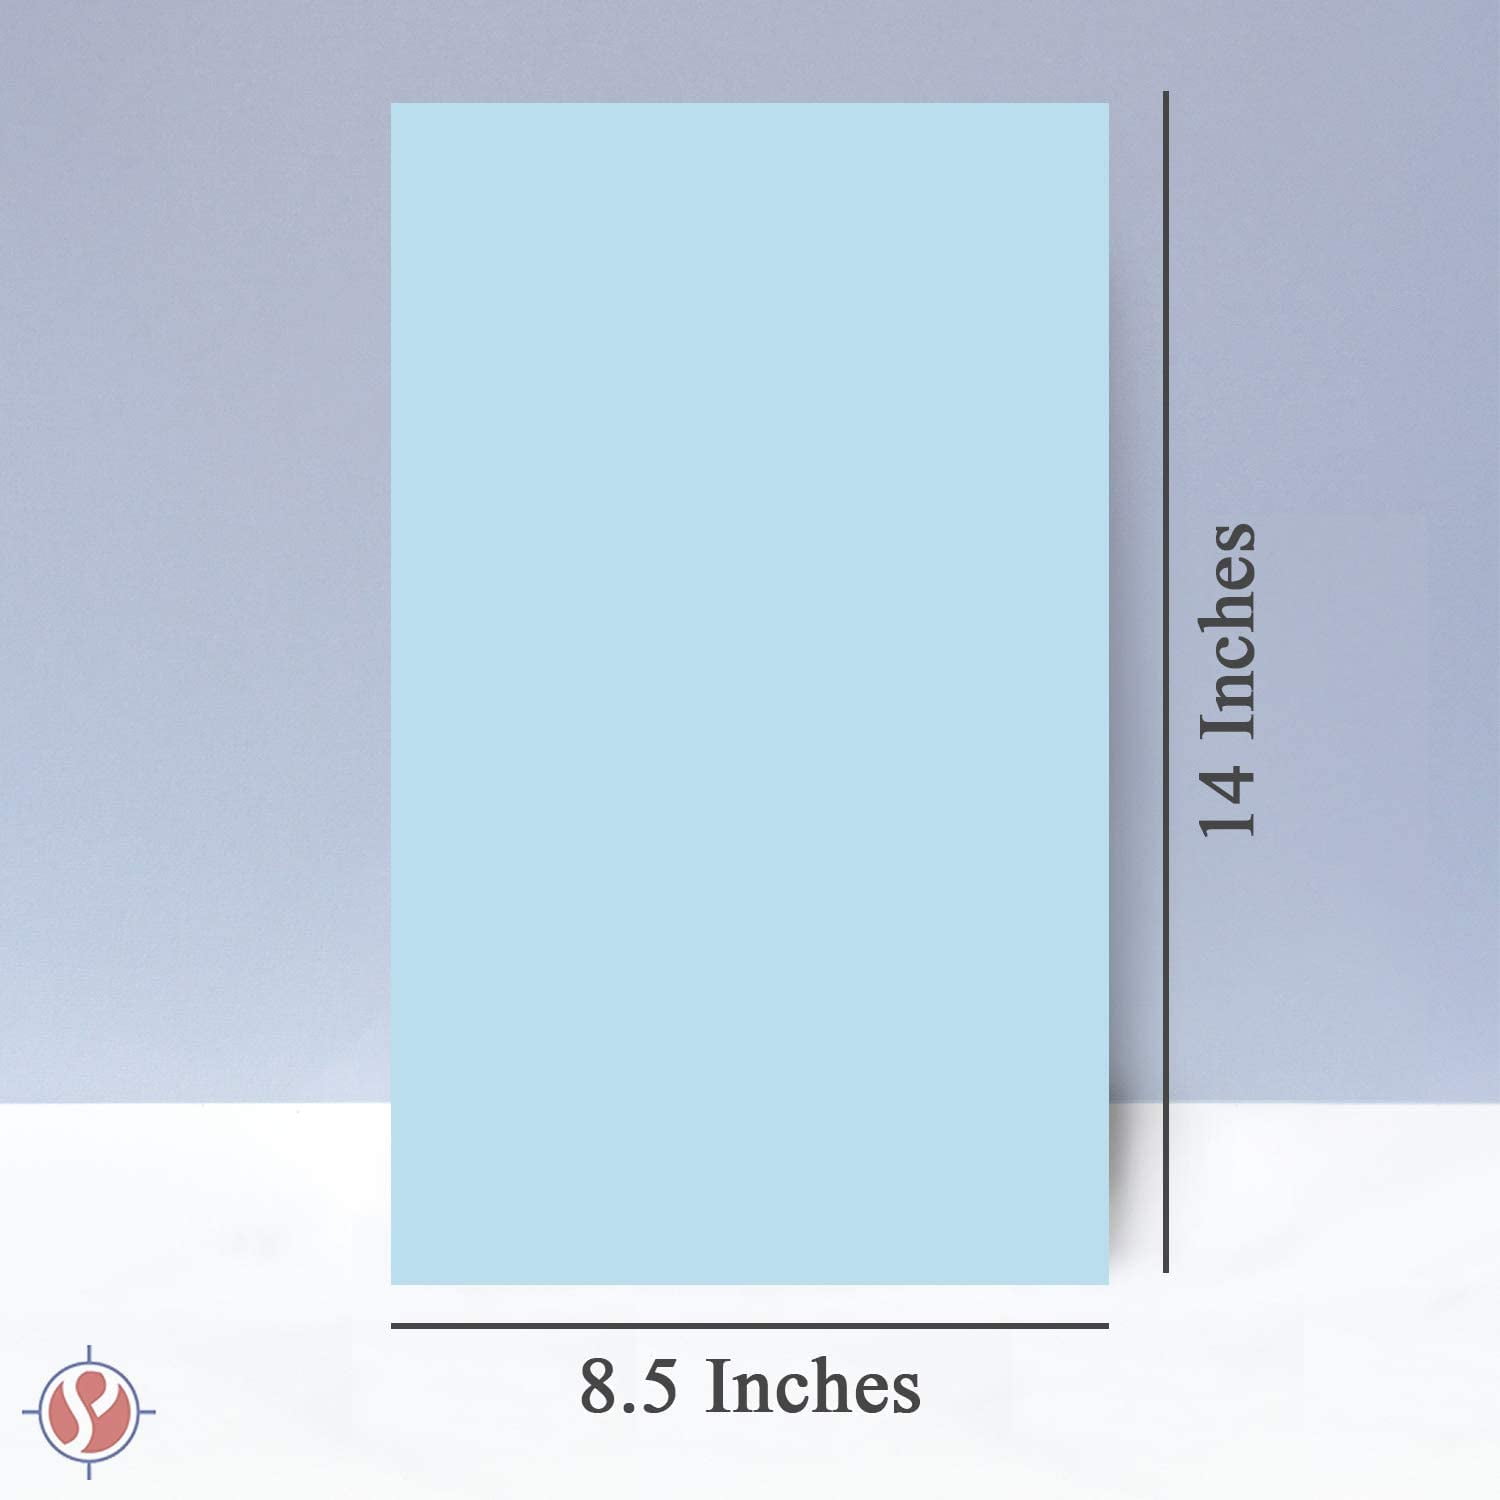 Blue Pastel Legal Size Paper, Staples Brand, 8.5” x 14”, Ream Of